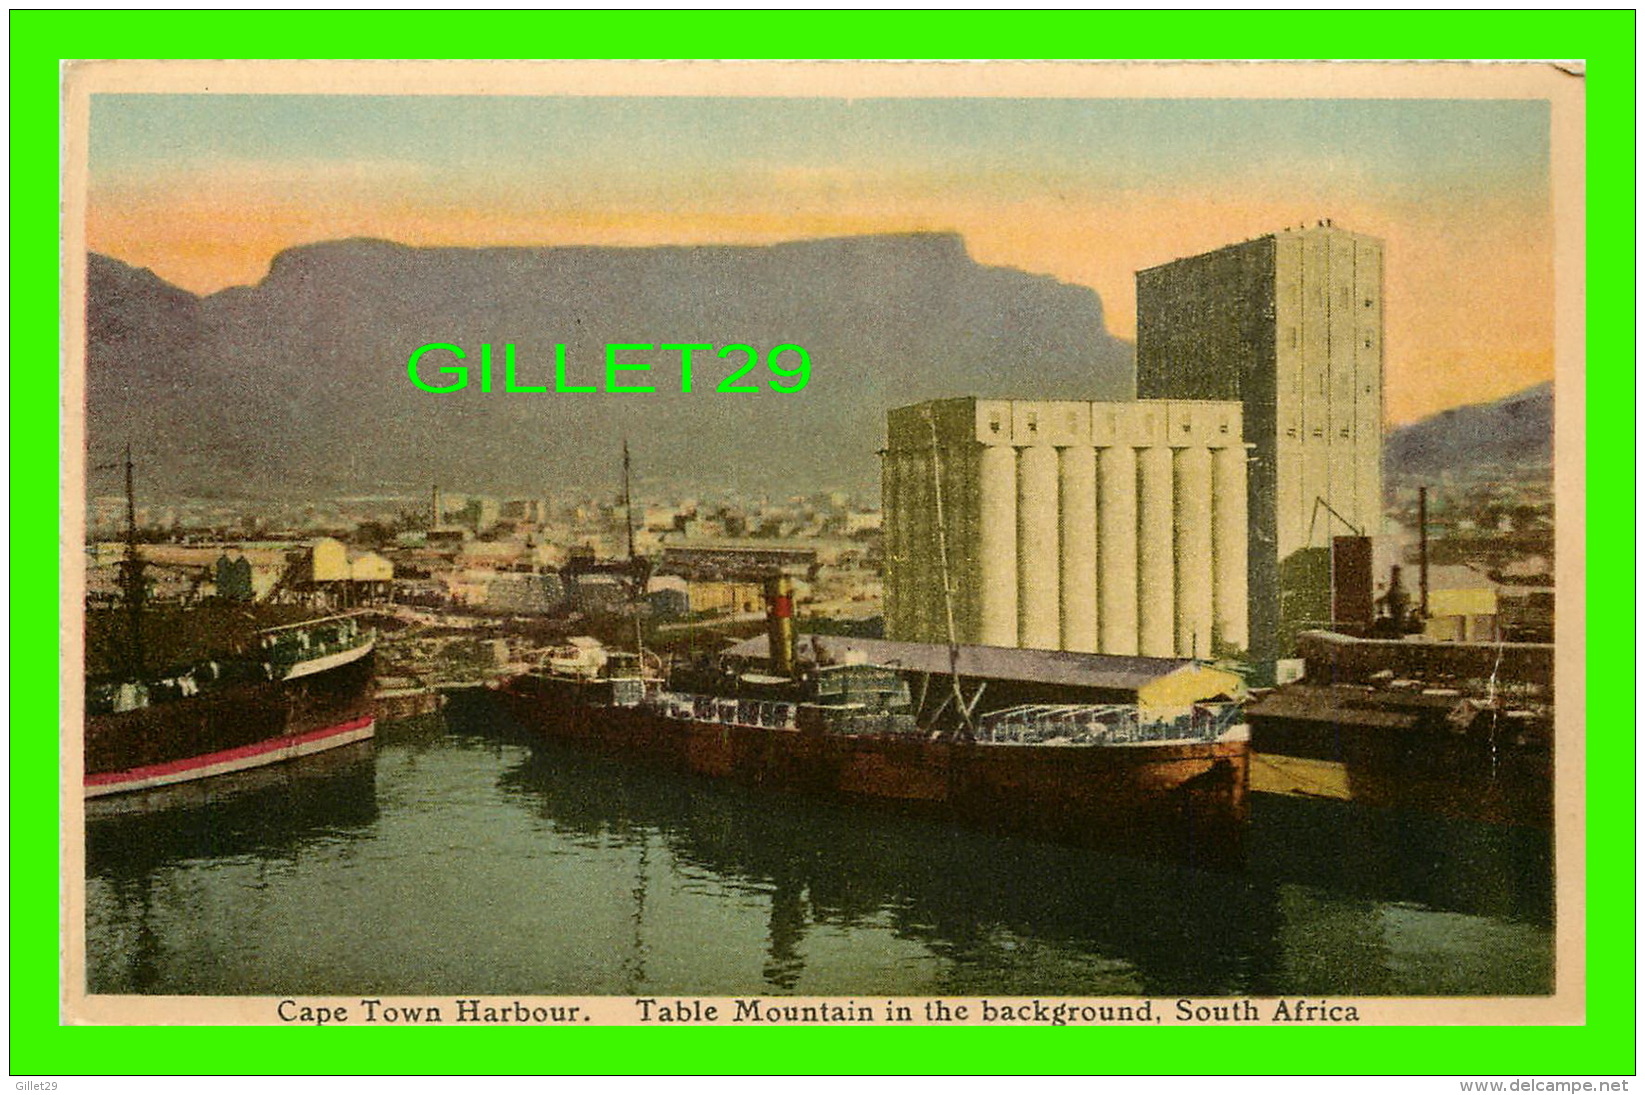 CAPE TOWN, SOUTH AFRICA - HARBOUR, TABLE MOUNTAIN IN THE BACKGROUND - ANIMATED WITH SHIPS - MOFFATS ELECTRIC RANGES - - Afrique Du Sud